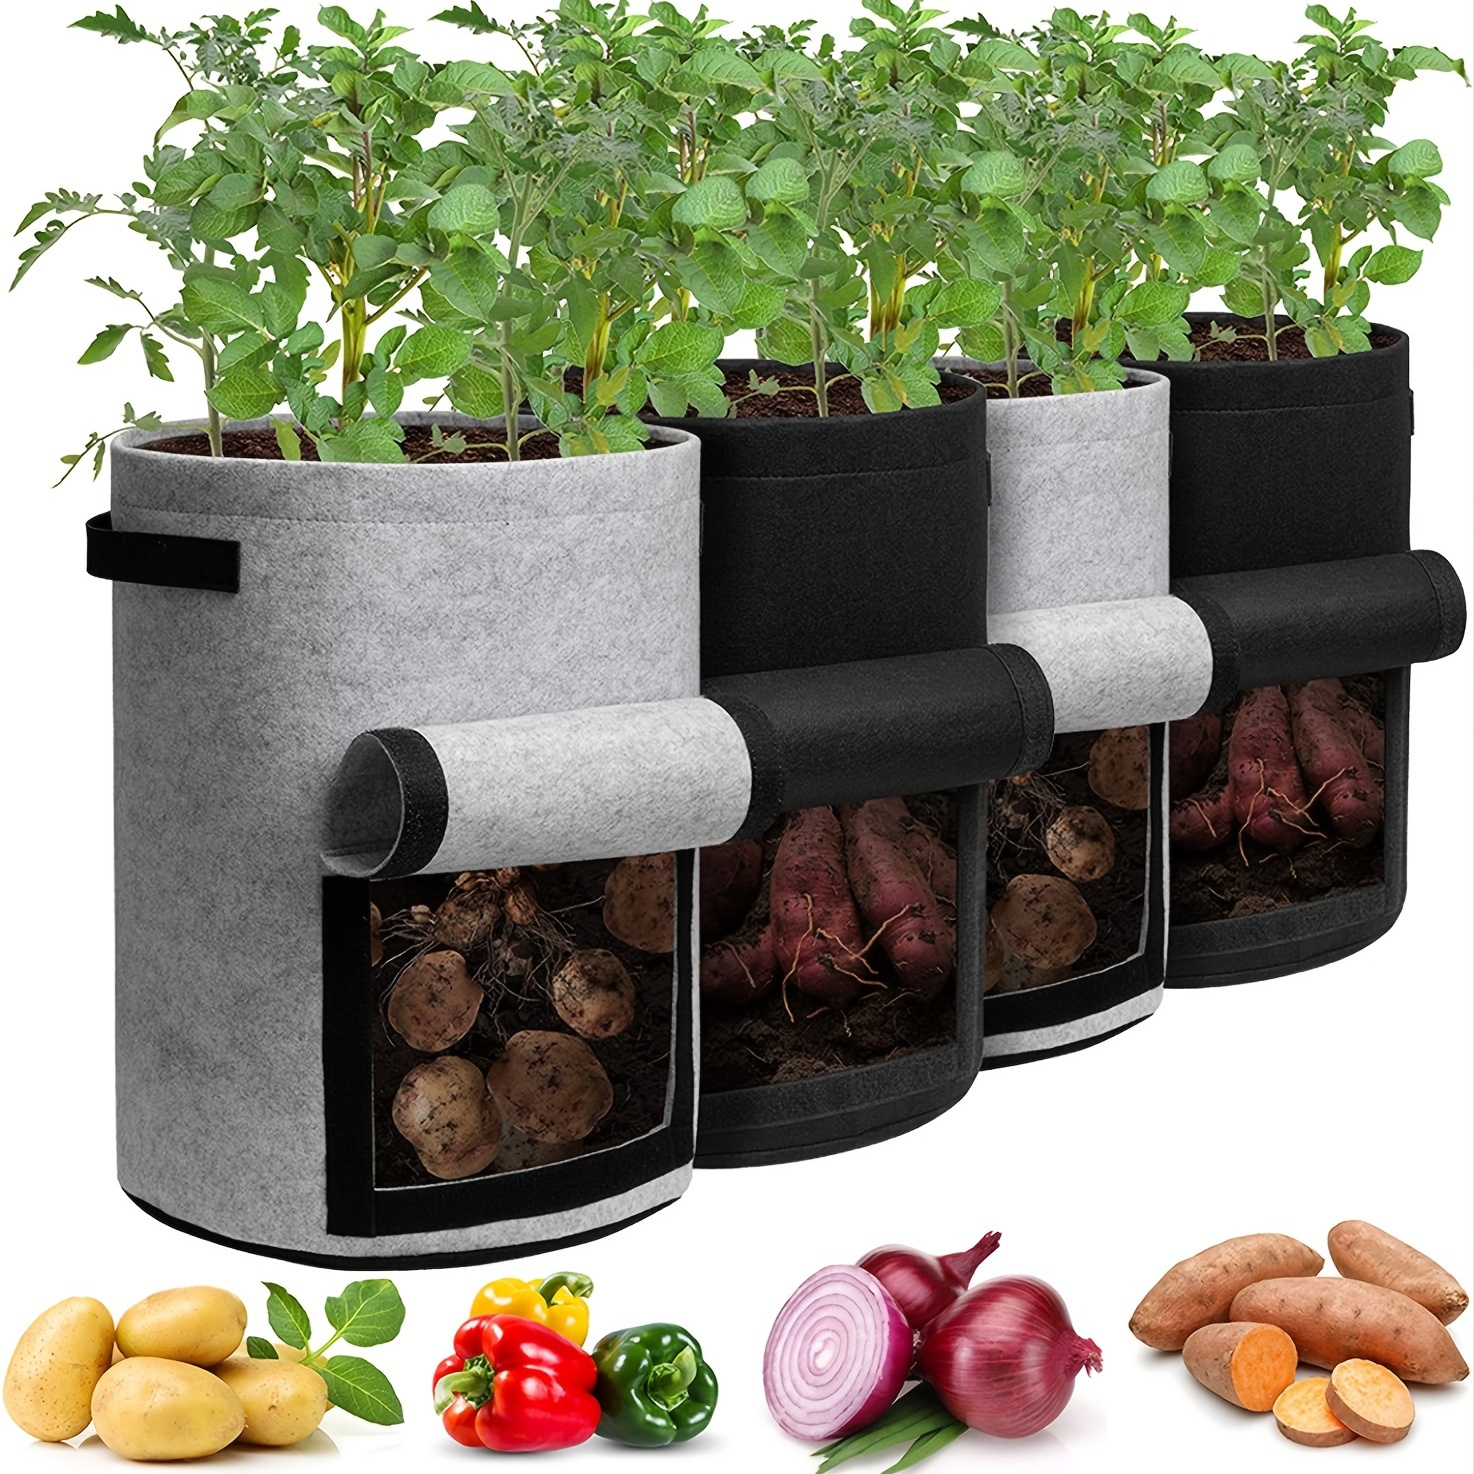 

1pc Potato Grow Bags With Flap 7/10 Gallons, Planter Pot With Handles And Harvest Window For Potato Tomato And Vegetables, Black/gray